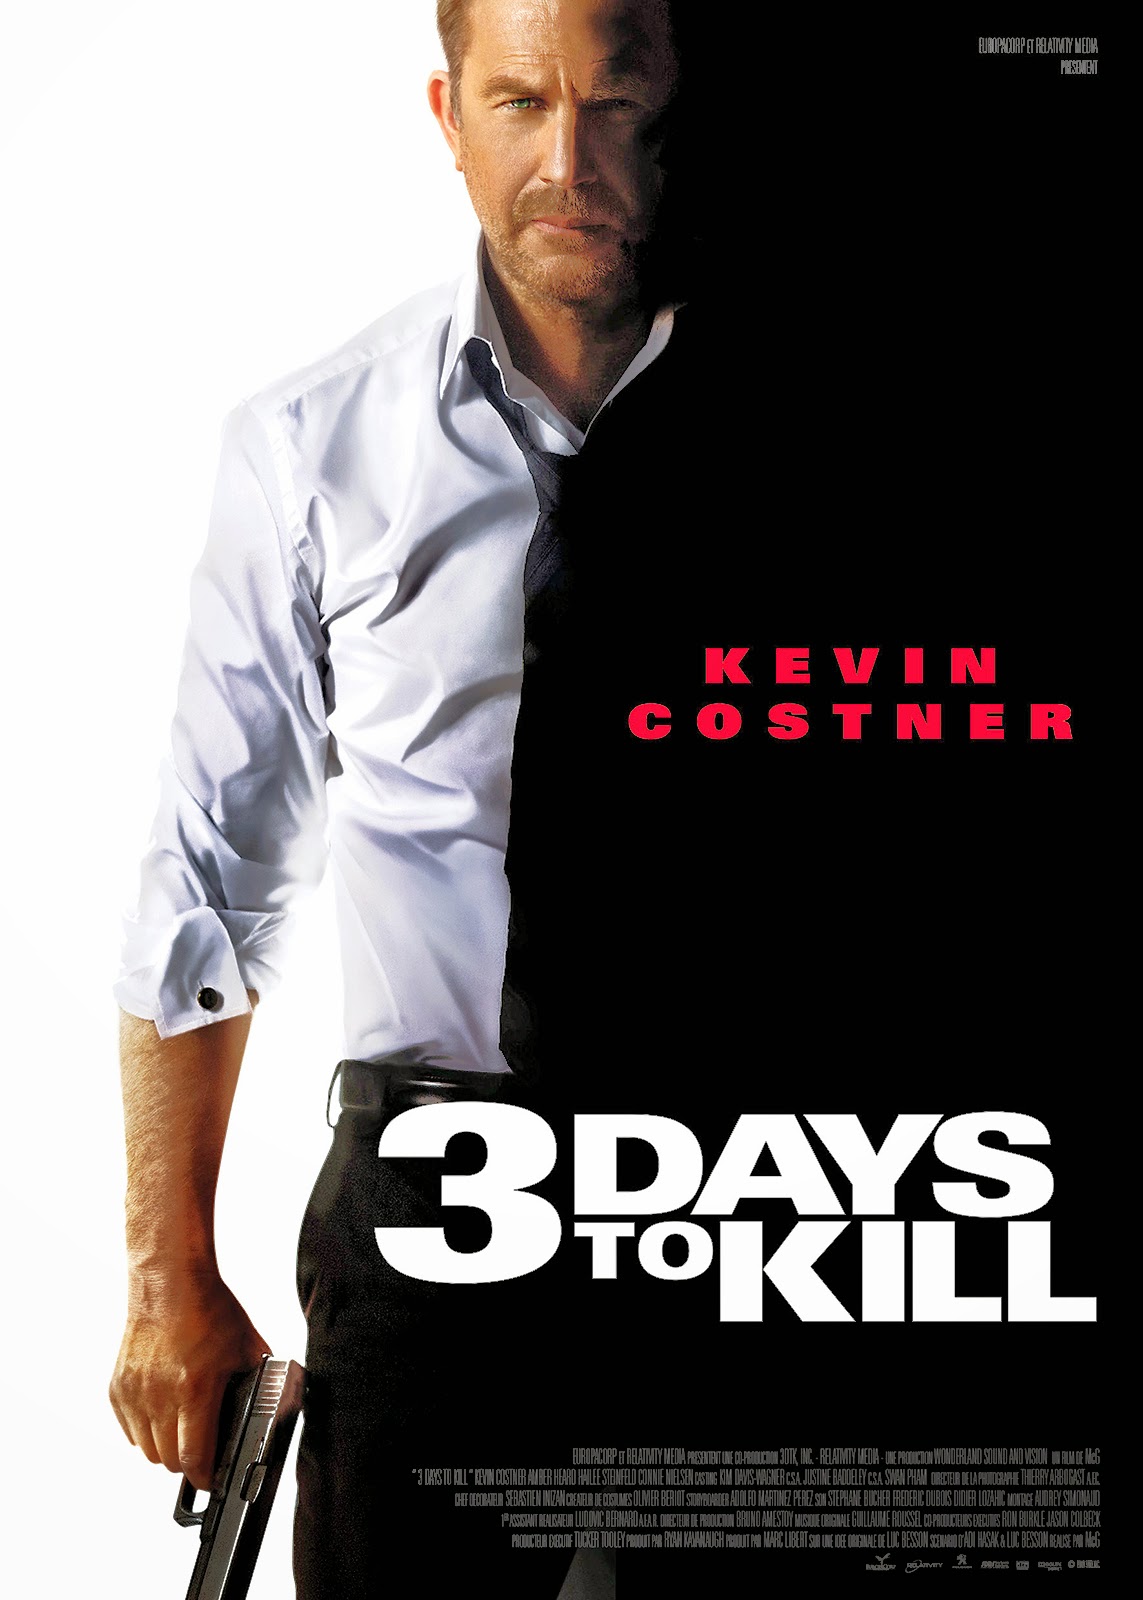 http://fuckingcinephiles.blogspot.fr/2014/03/critique-3-days-to-kill.html